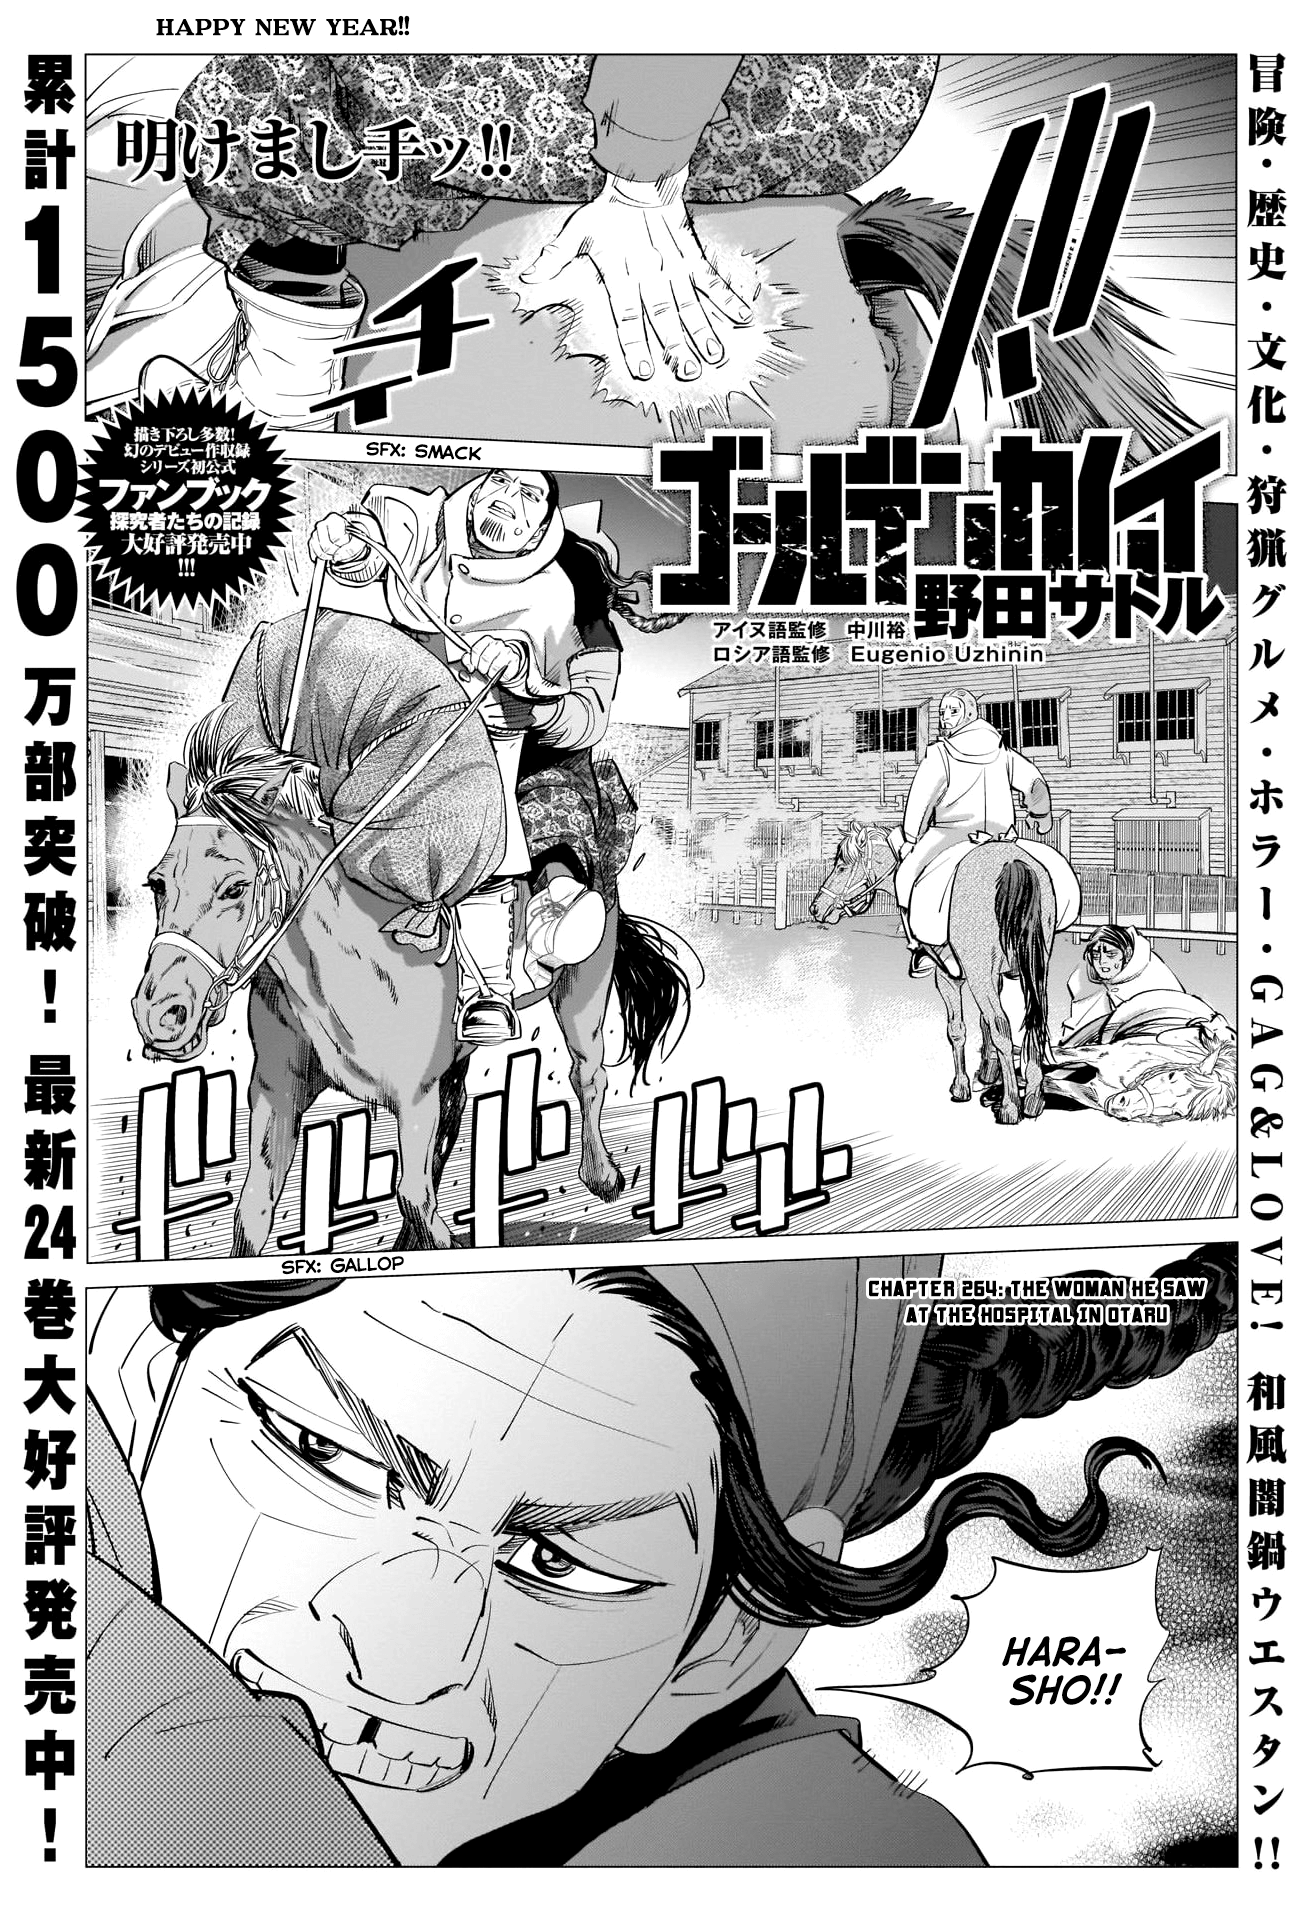 Golden Kamui Chapter 264: The Woman He Saw At The Hospital In Otaru - Picture 1